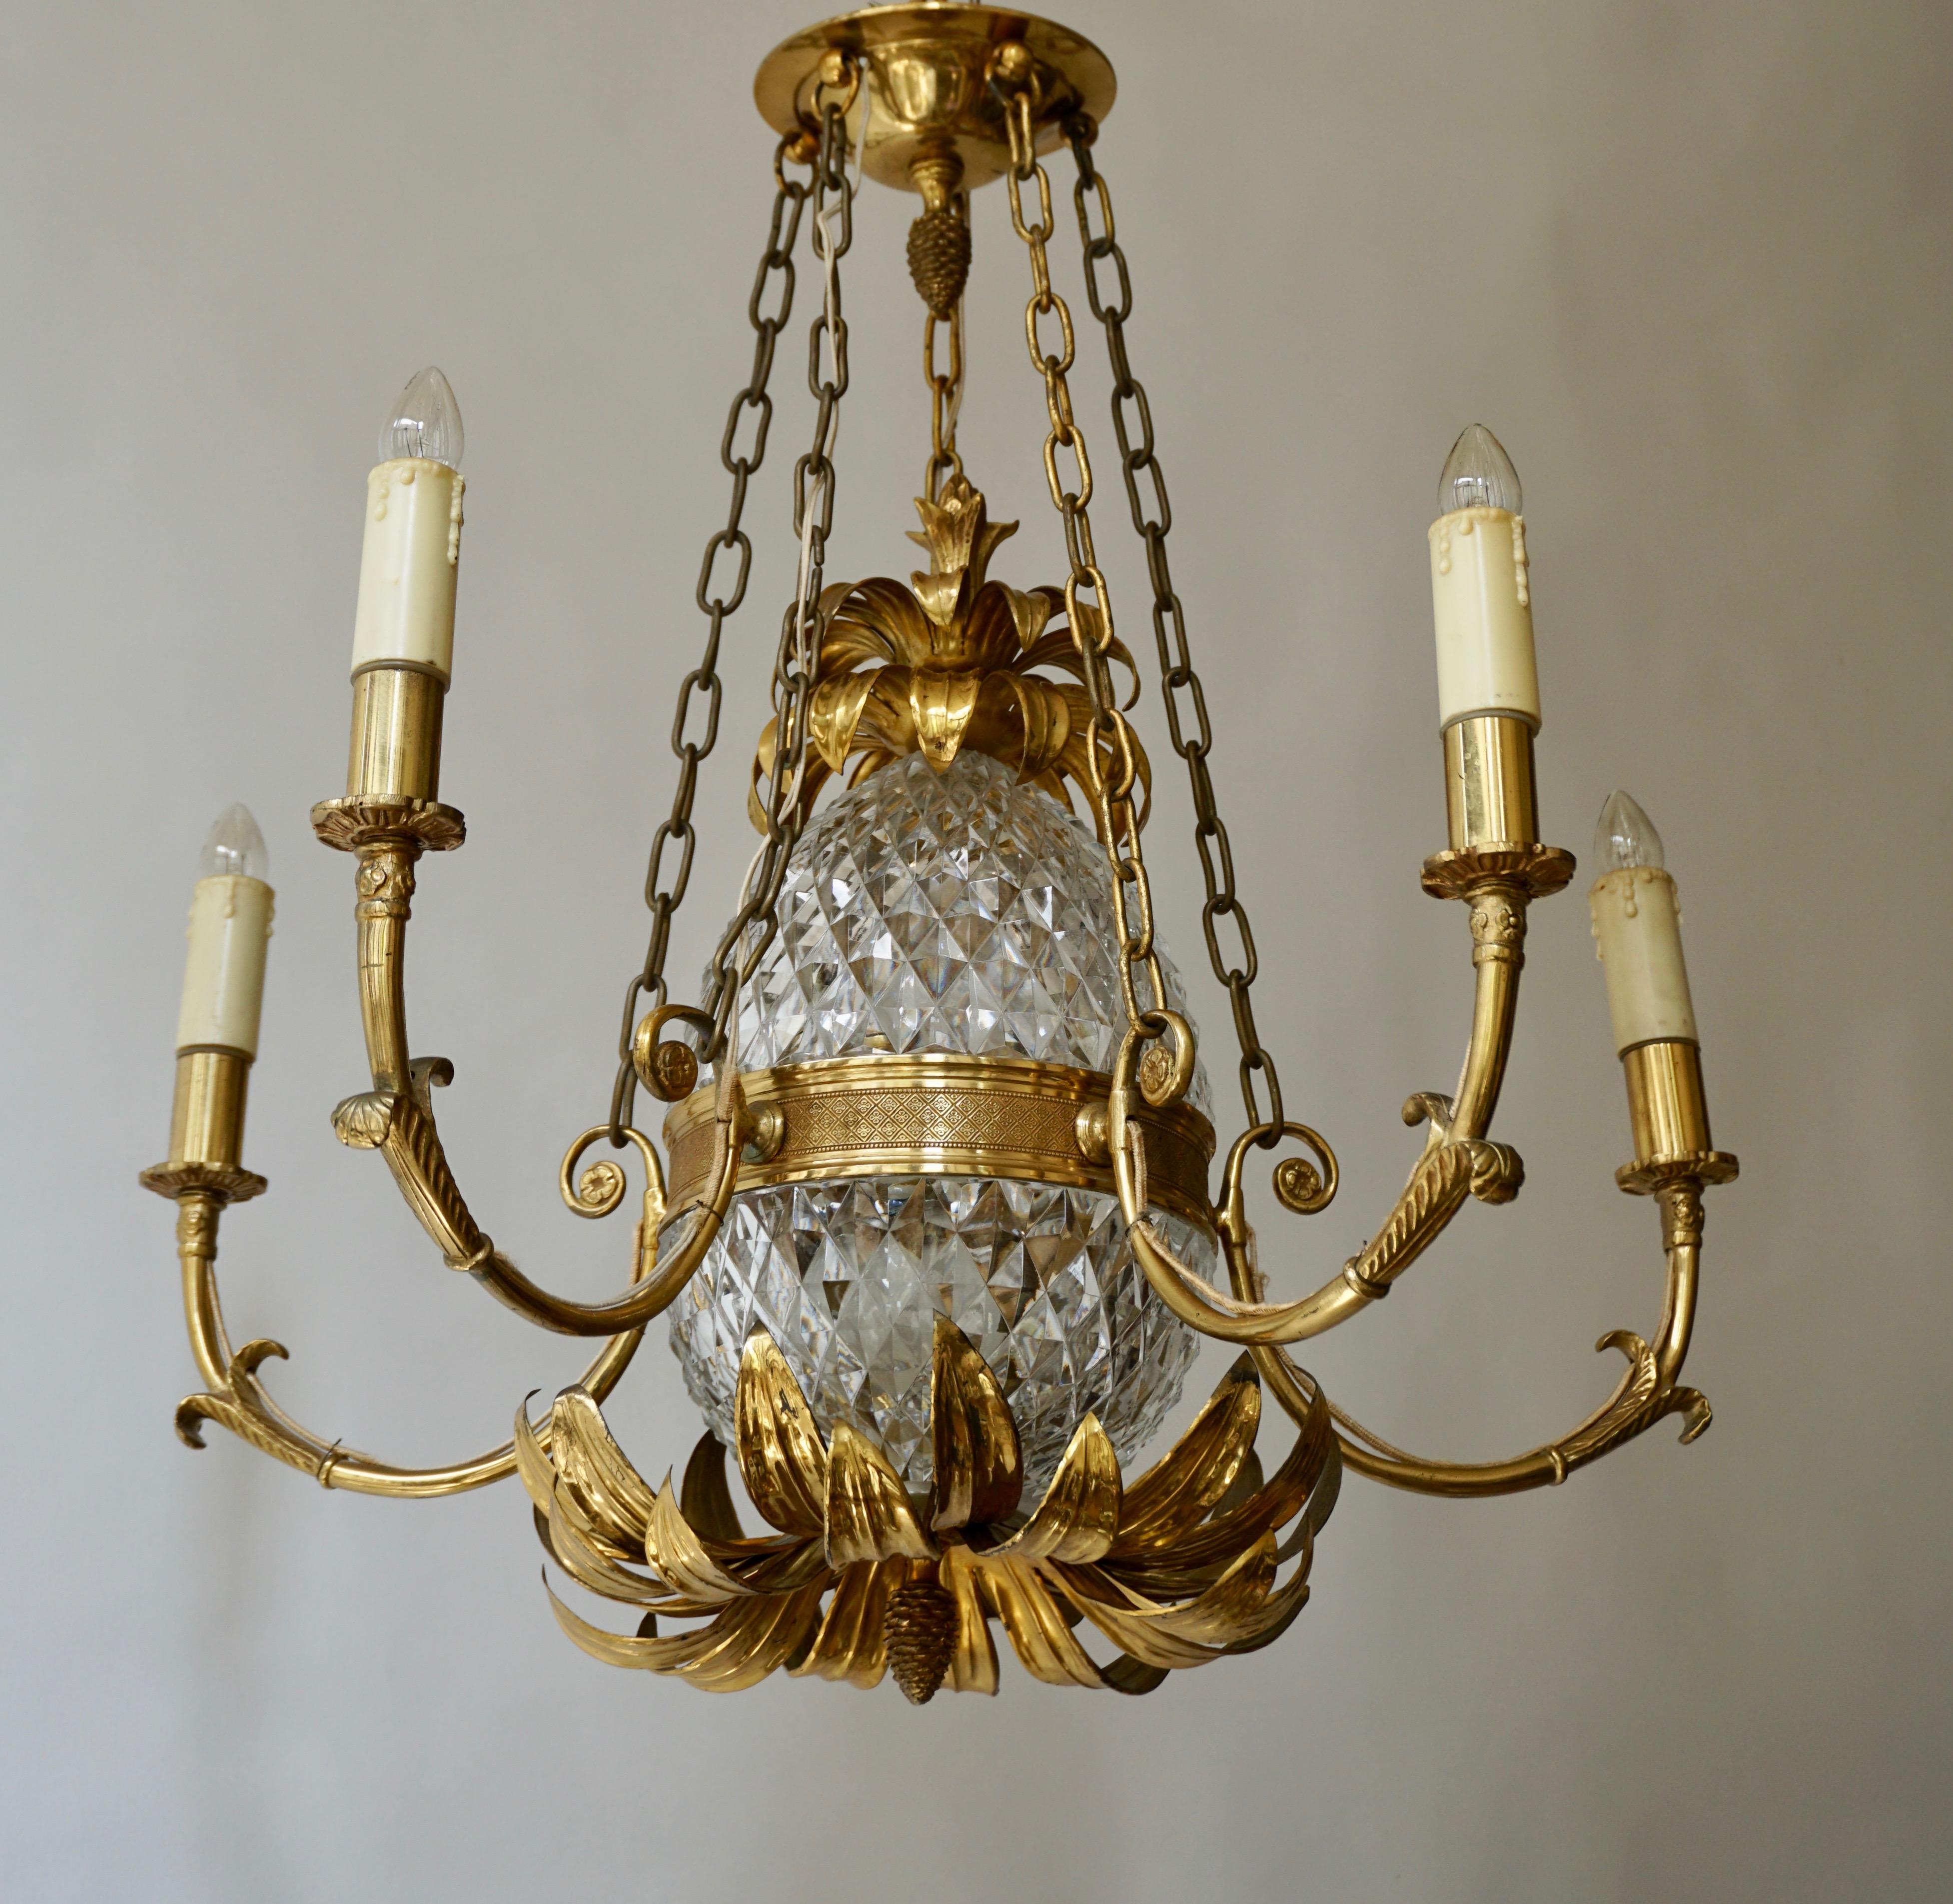 Gilt Brass and Cut Crystal Pineapple Chandelier with 5-Arm Light For Sale